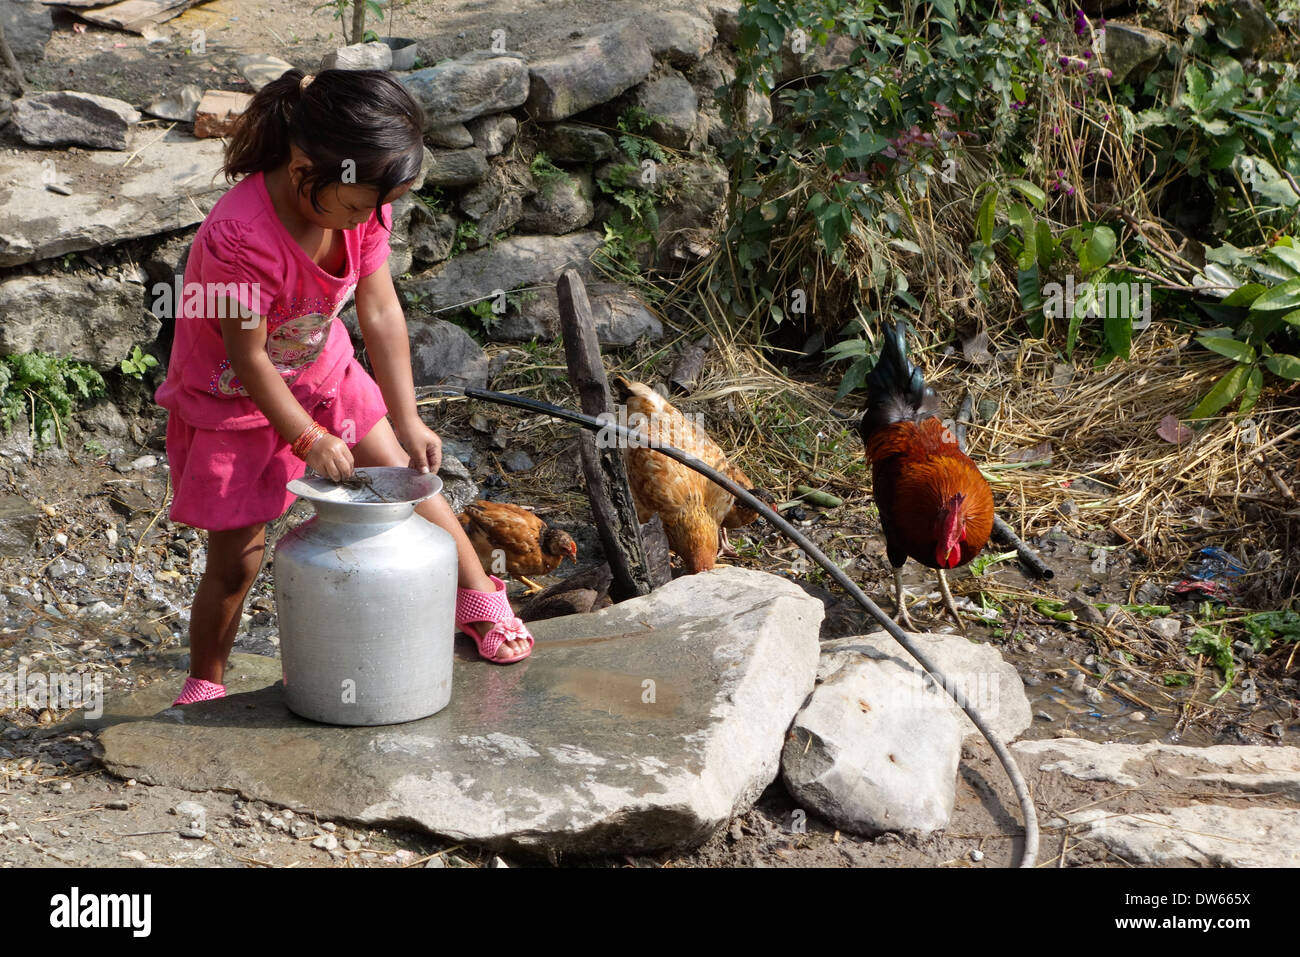 Nepalese girl and chickens in the Gorkha region, Nepal. Stock Photo